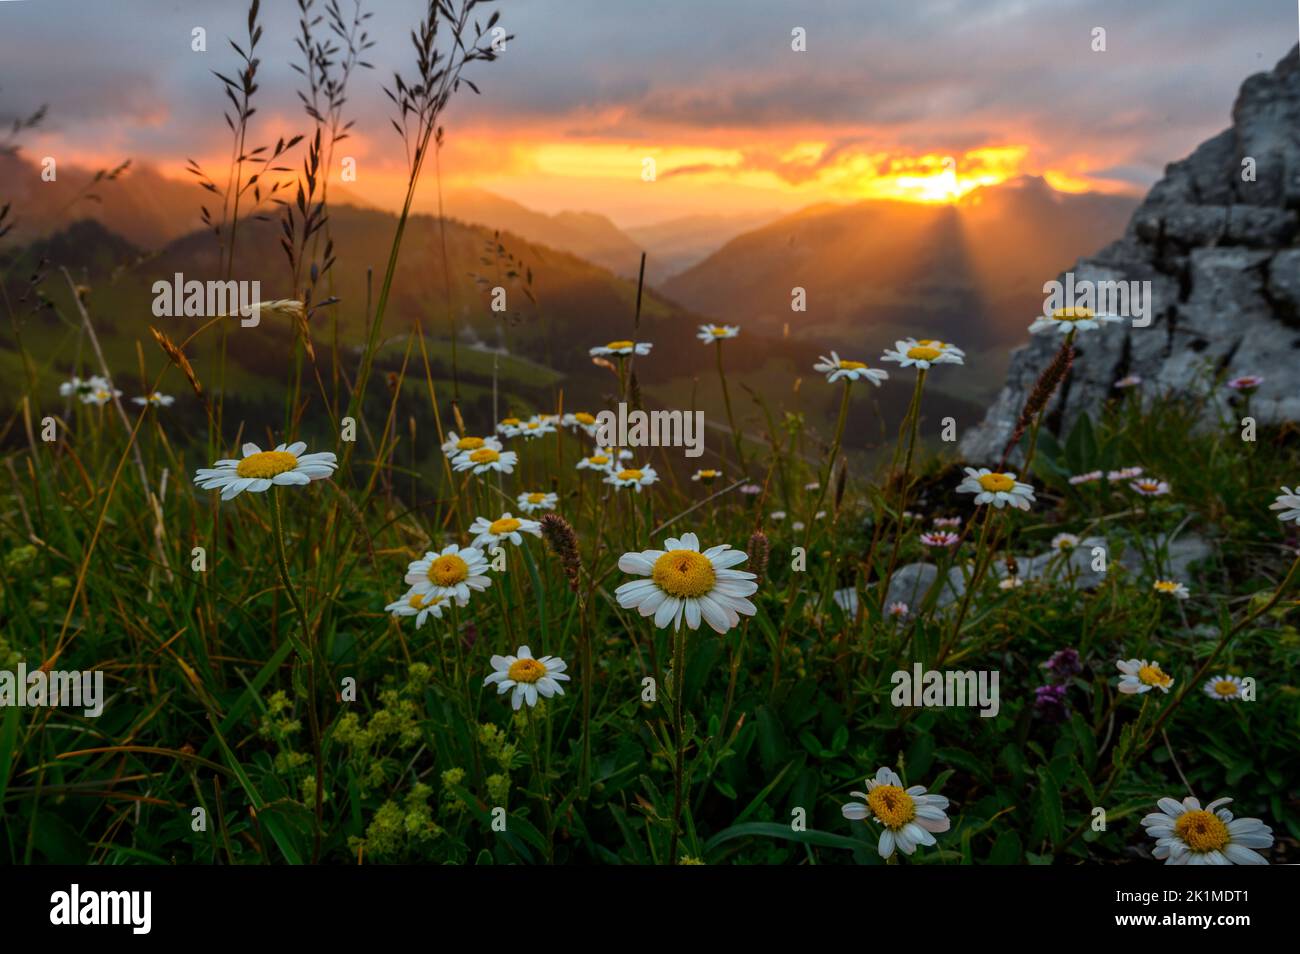 dramatic sunset mood with tyndall effect and flowering daisy flowers in the alpine foothills of Fribourg Stock Photo